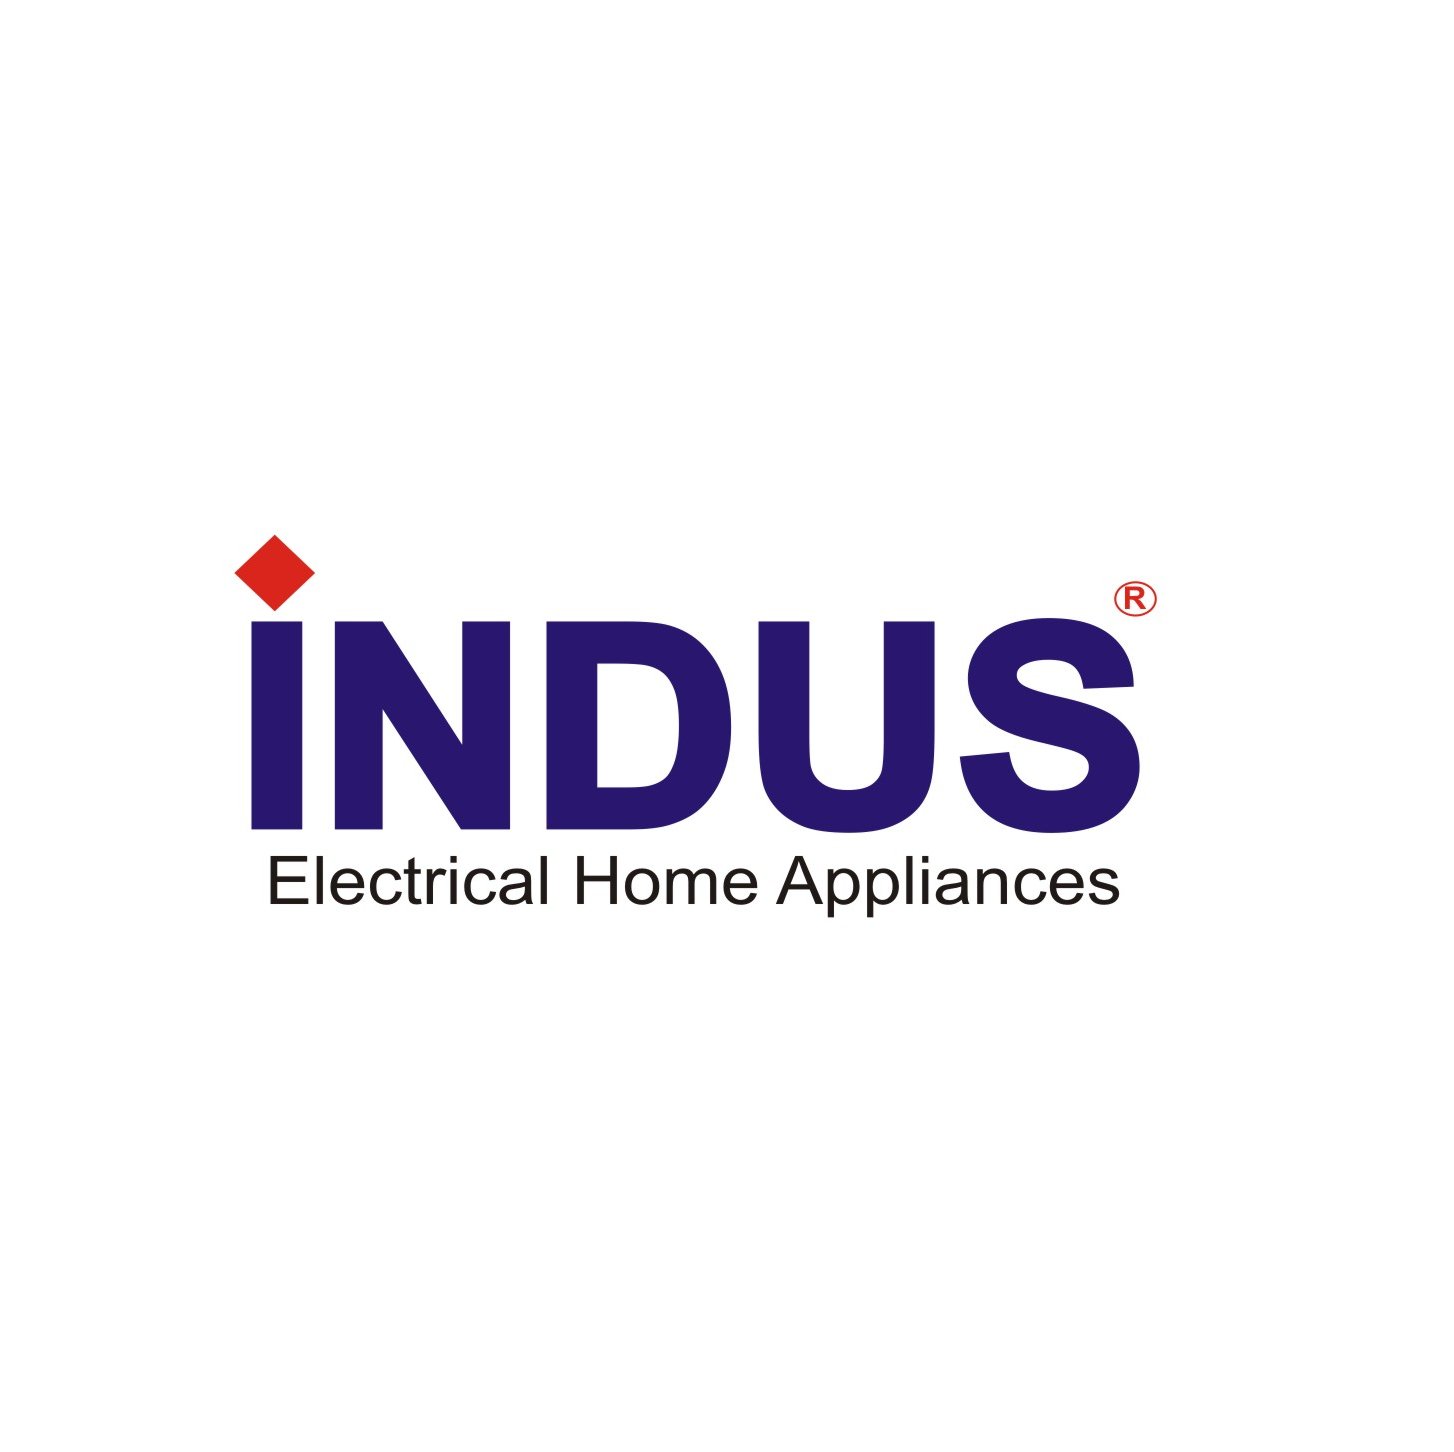 Indus Home Appliances - Known brand in market. Our Motto - 